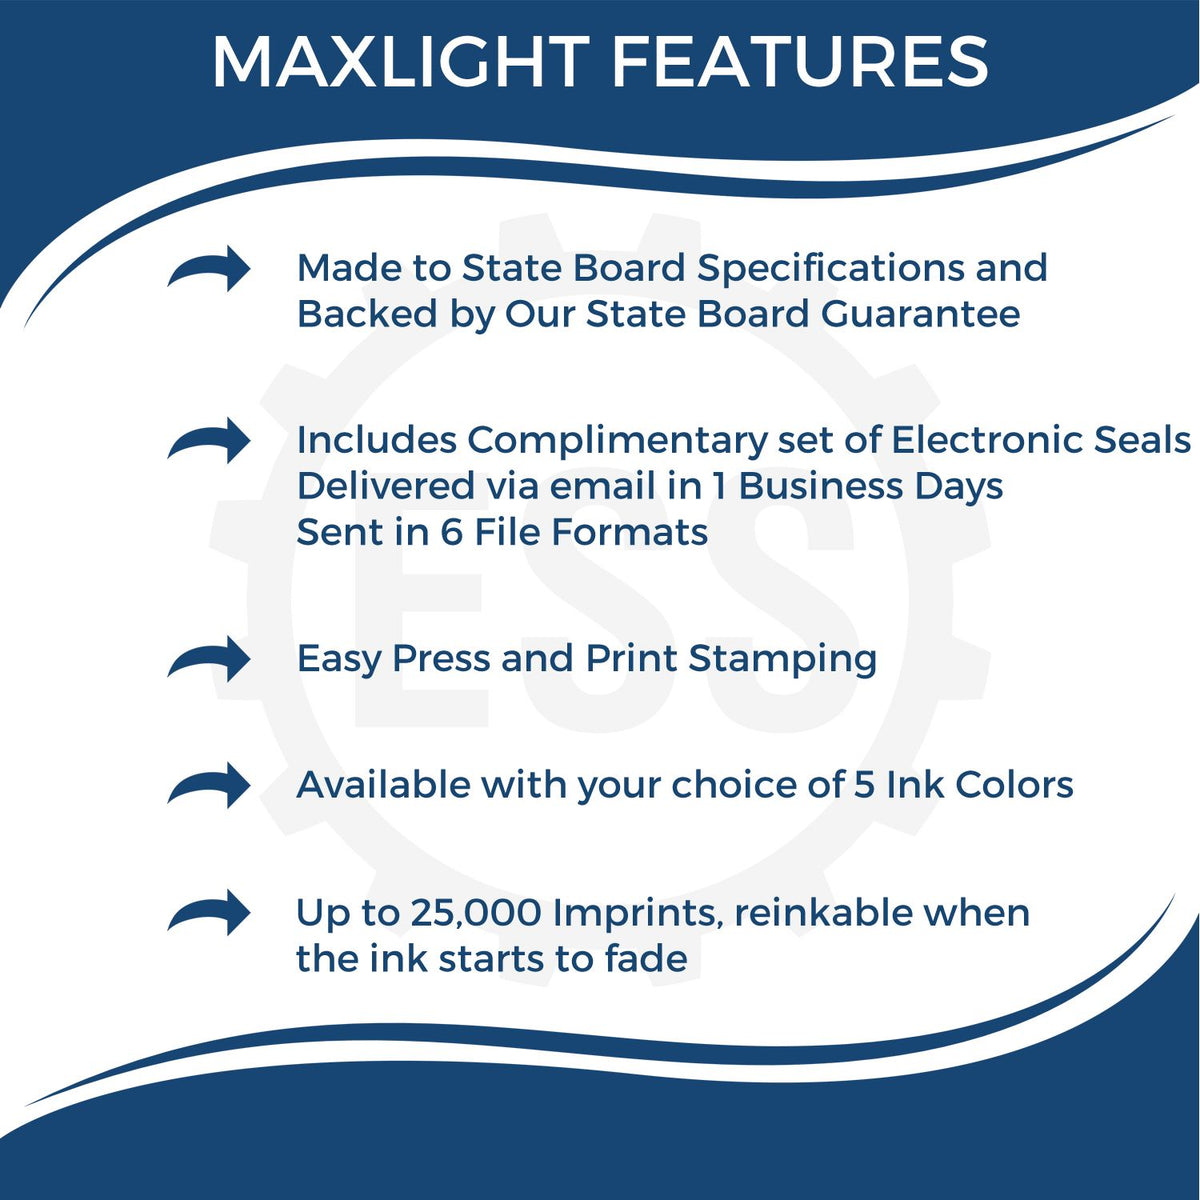 A picture of an infographic highlighting the selling points for the Premium MaxLight Pre-Inked Iowa Geology Stamp